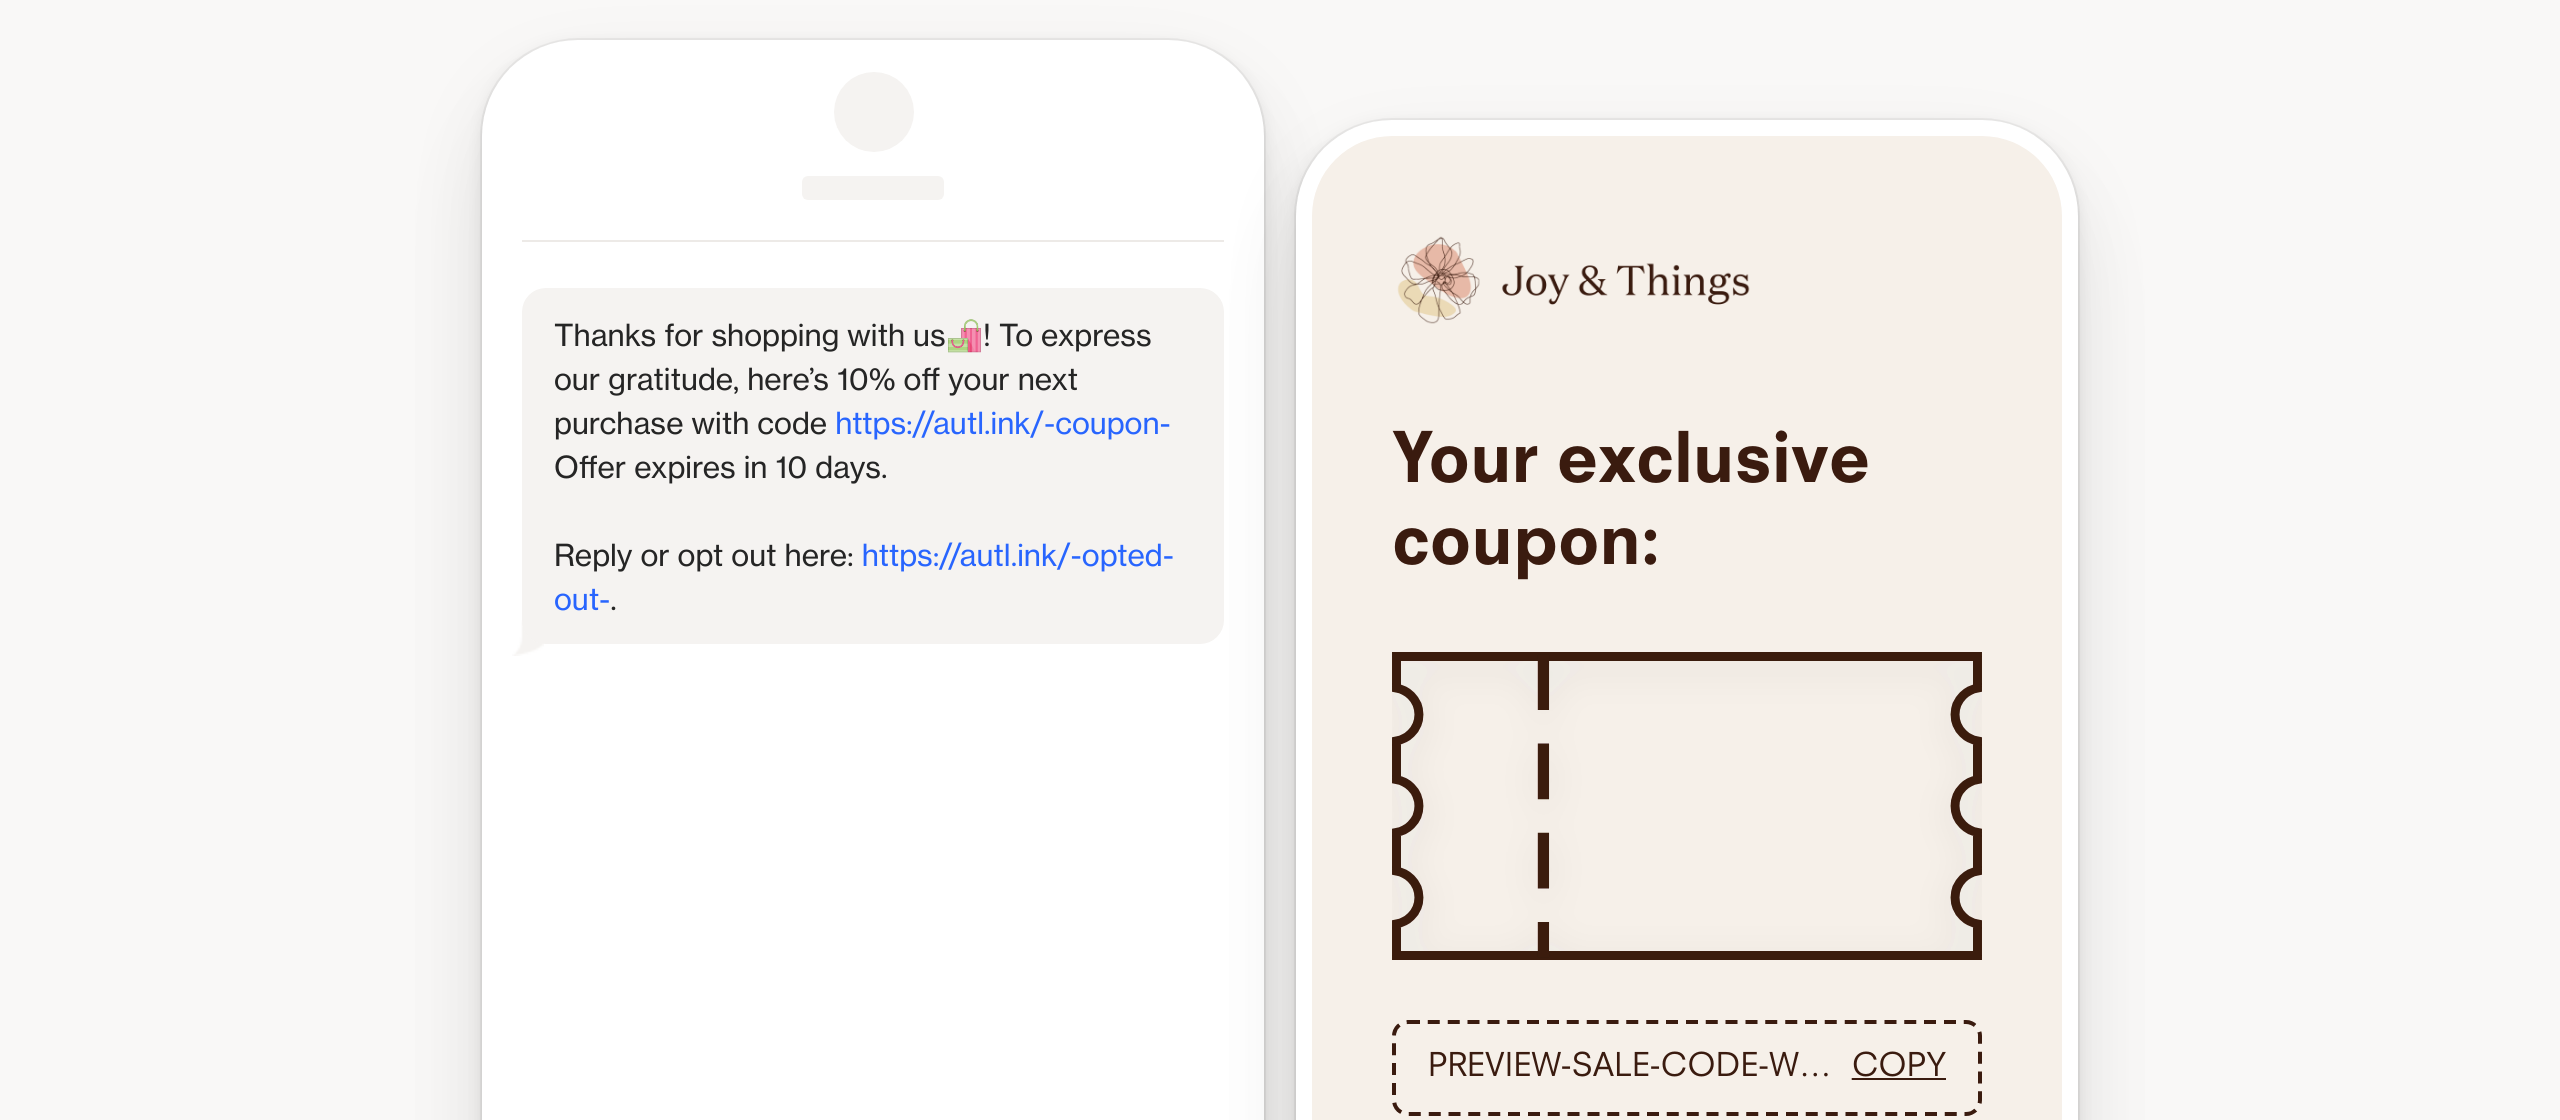 Post-purchase SMS with coupon